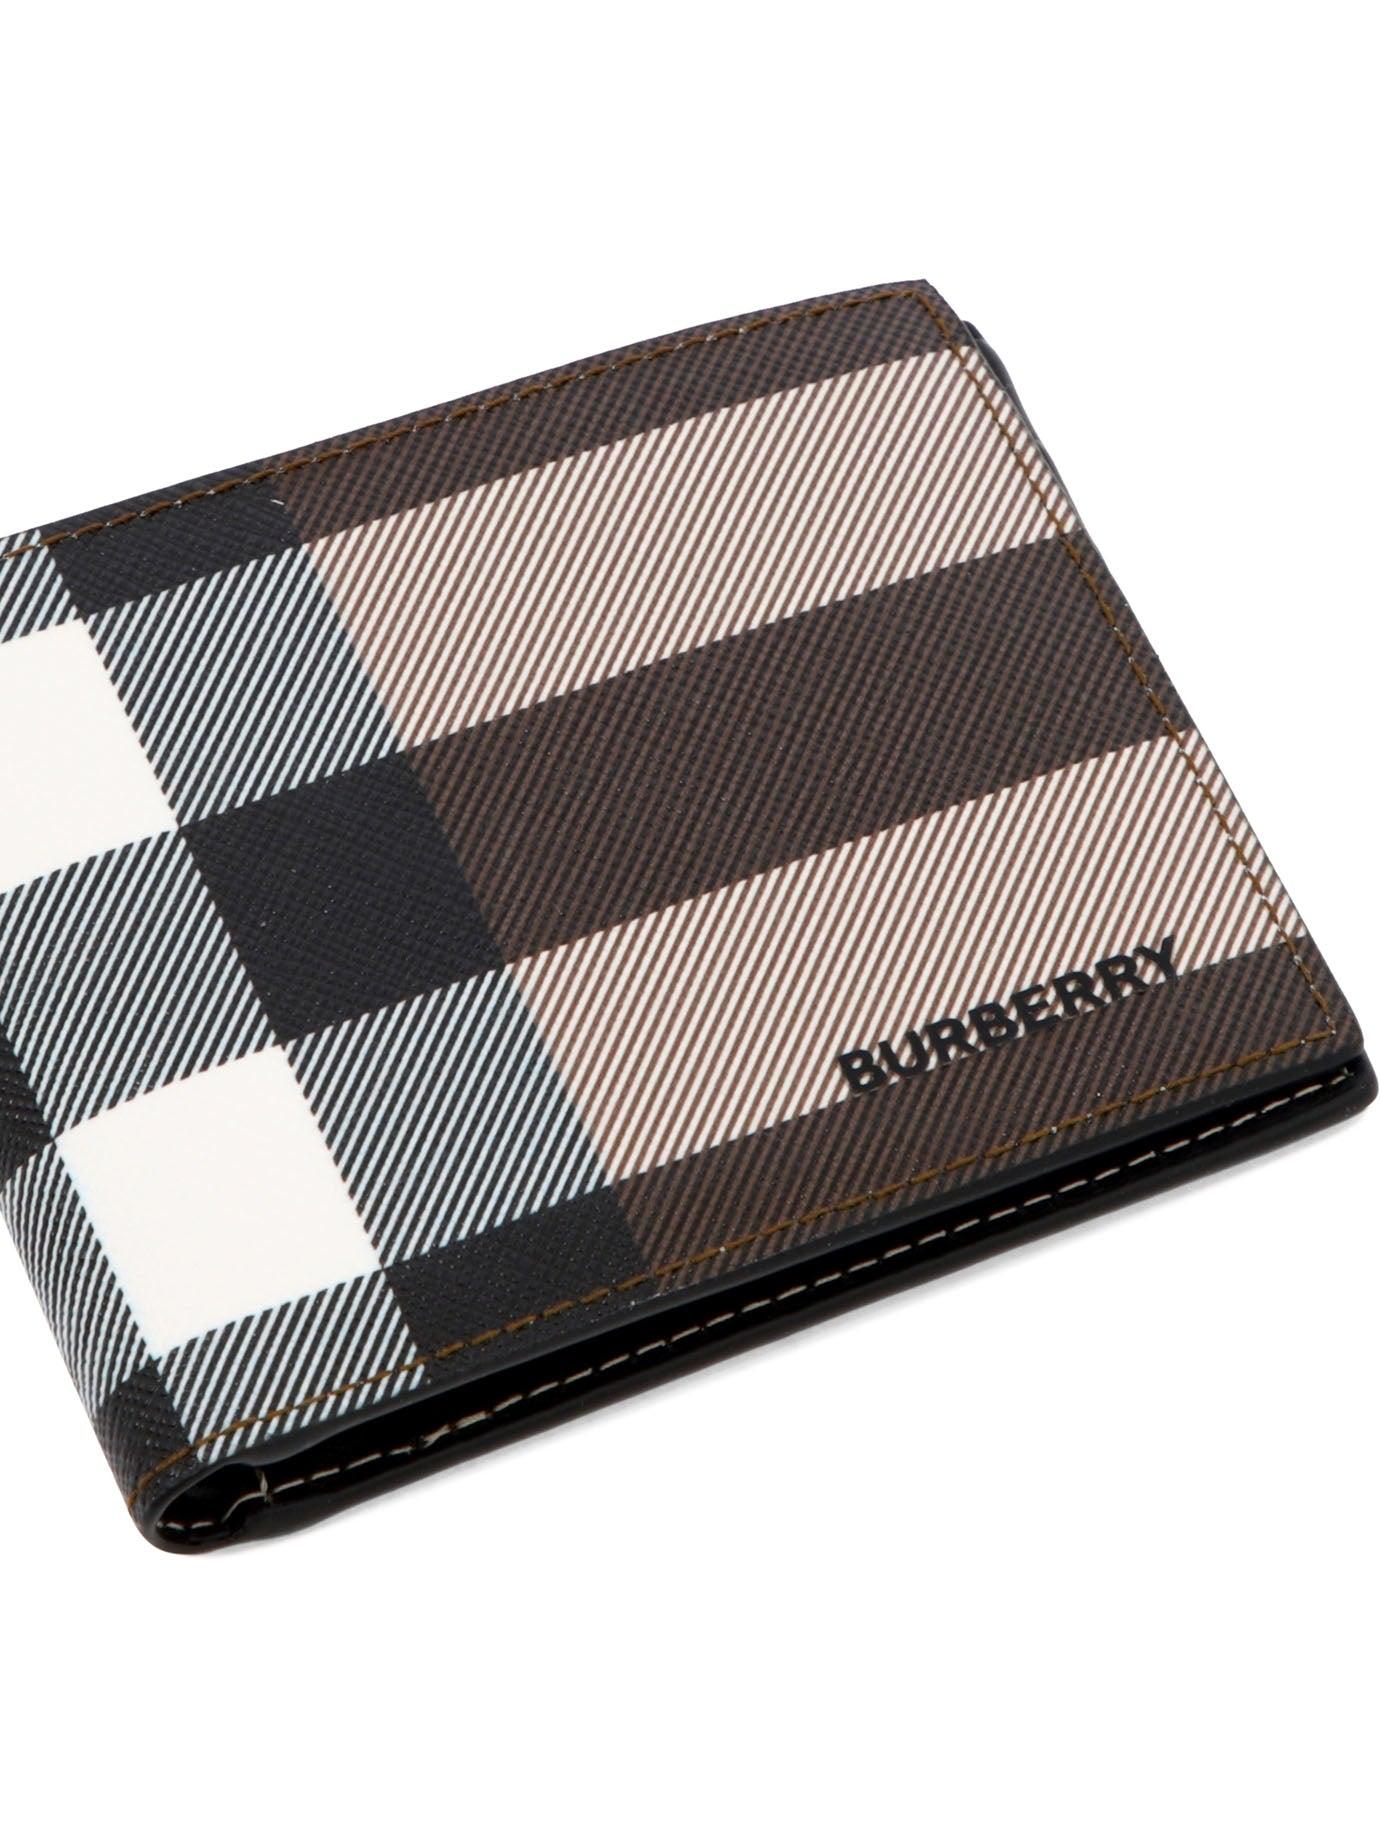 Burberry "hipfold" Wallet in Brown (White) for Men - Save 24% | Lyst